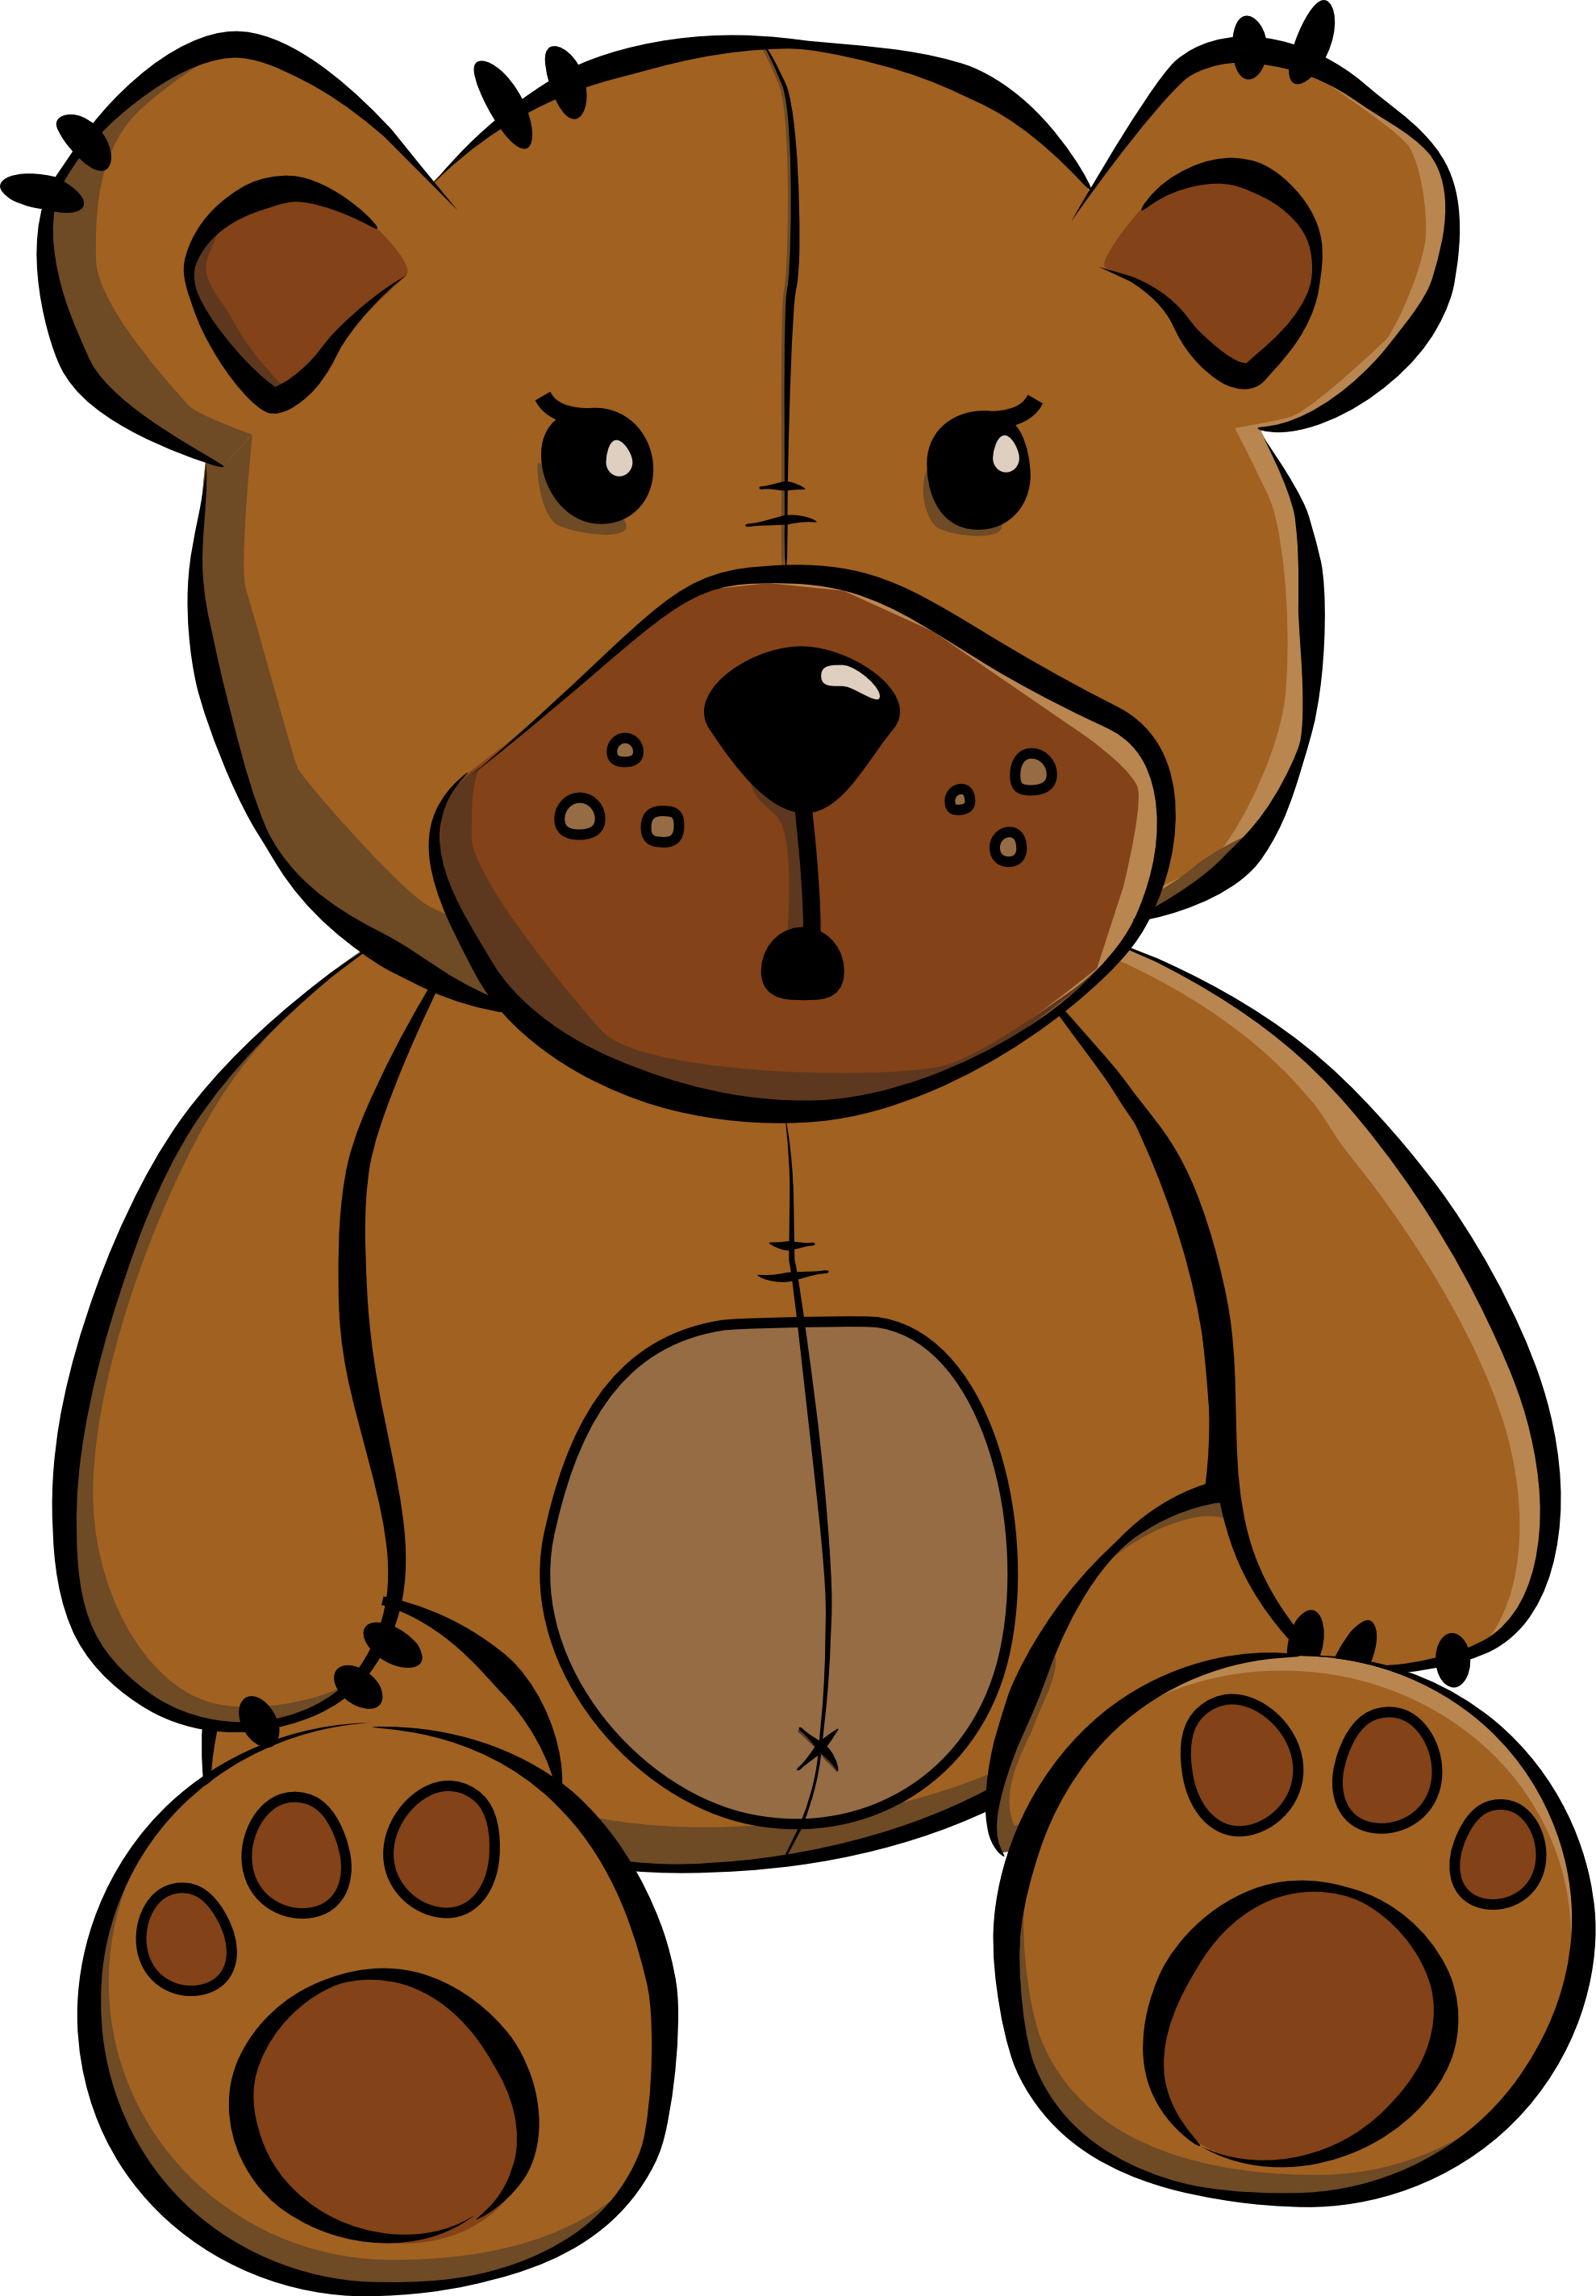 Bear png free images. Lion clipart toy